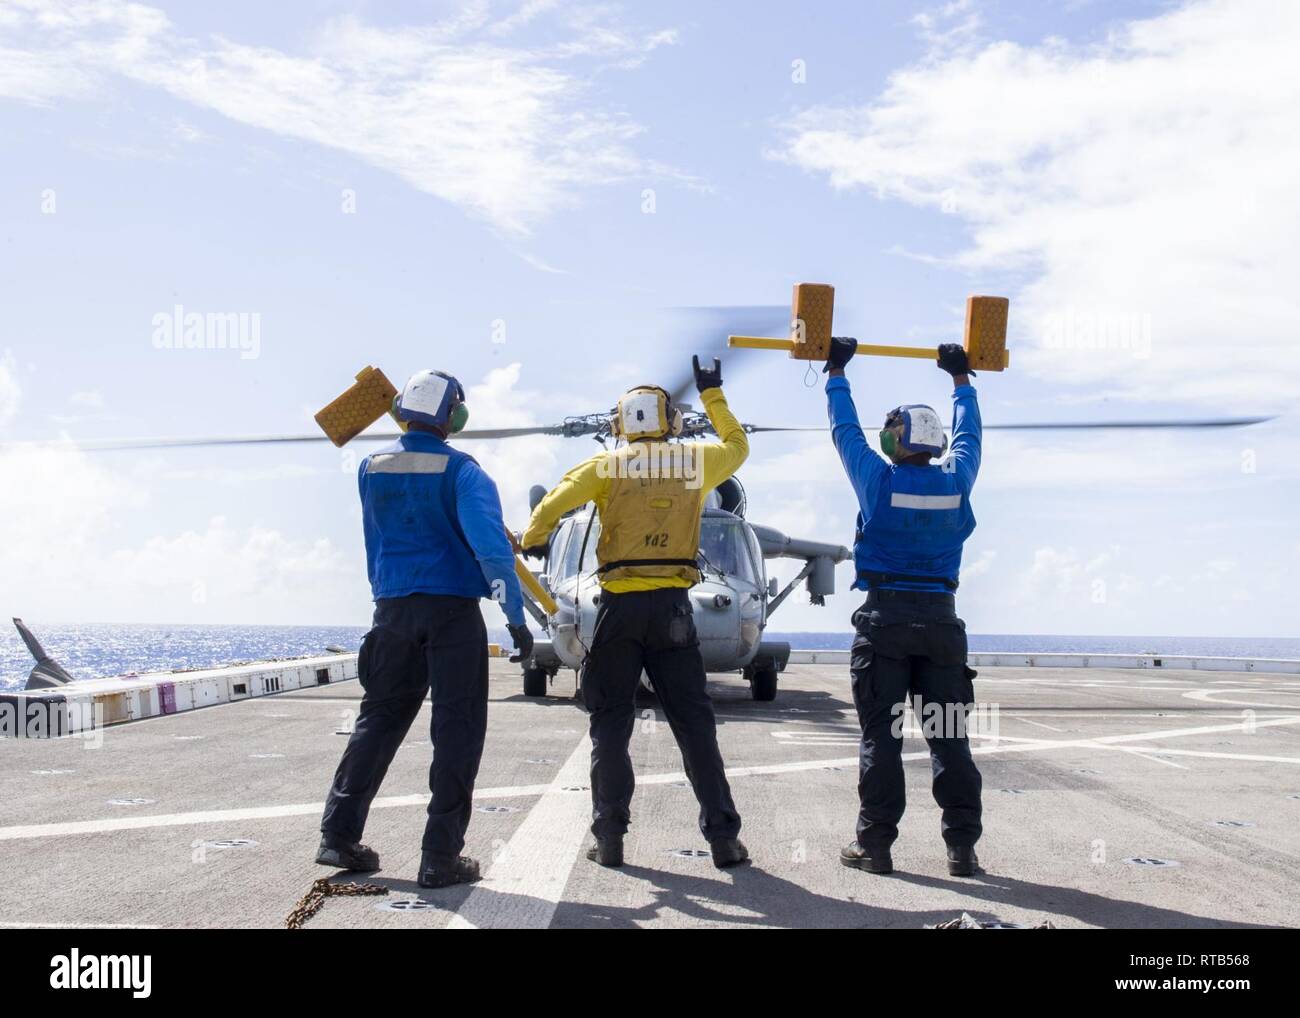 PACIFIC OCEAN (Feb. 7, 2019) Sailors assigned to the San Antonio-class amphibious transport dock ship USS Anchorage (LPD 23) display chocks to the pilots of a MH-60S Sea Hawk helicopter, attached to the “Blackjacks” of Helicopter Sea Combat Squadron (HSC) 21, during flight operations. Anchorage is on a deployment of the Essex Amphibious Ready Group (ARG) and 13th Marine Expeditionary Unit (MEU). The Essex ARG/13th MEU is a capable and lethal Navy-Marine Corps team deployed to the 7th fleet area of operations to support regional stability, reassure partners and allies and maintain a presence po Stock Photo